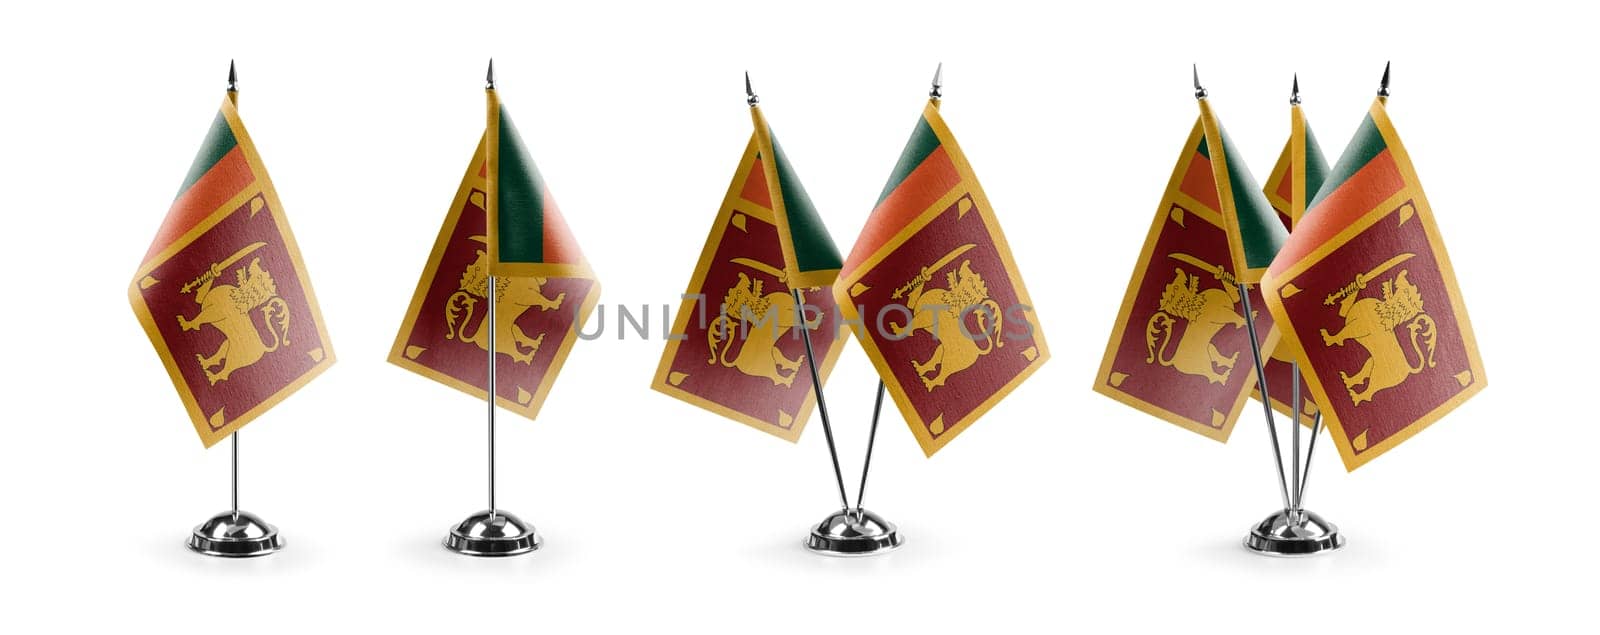 Small national flags of the Sri Lanka on a white background.